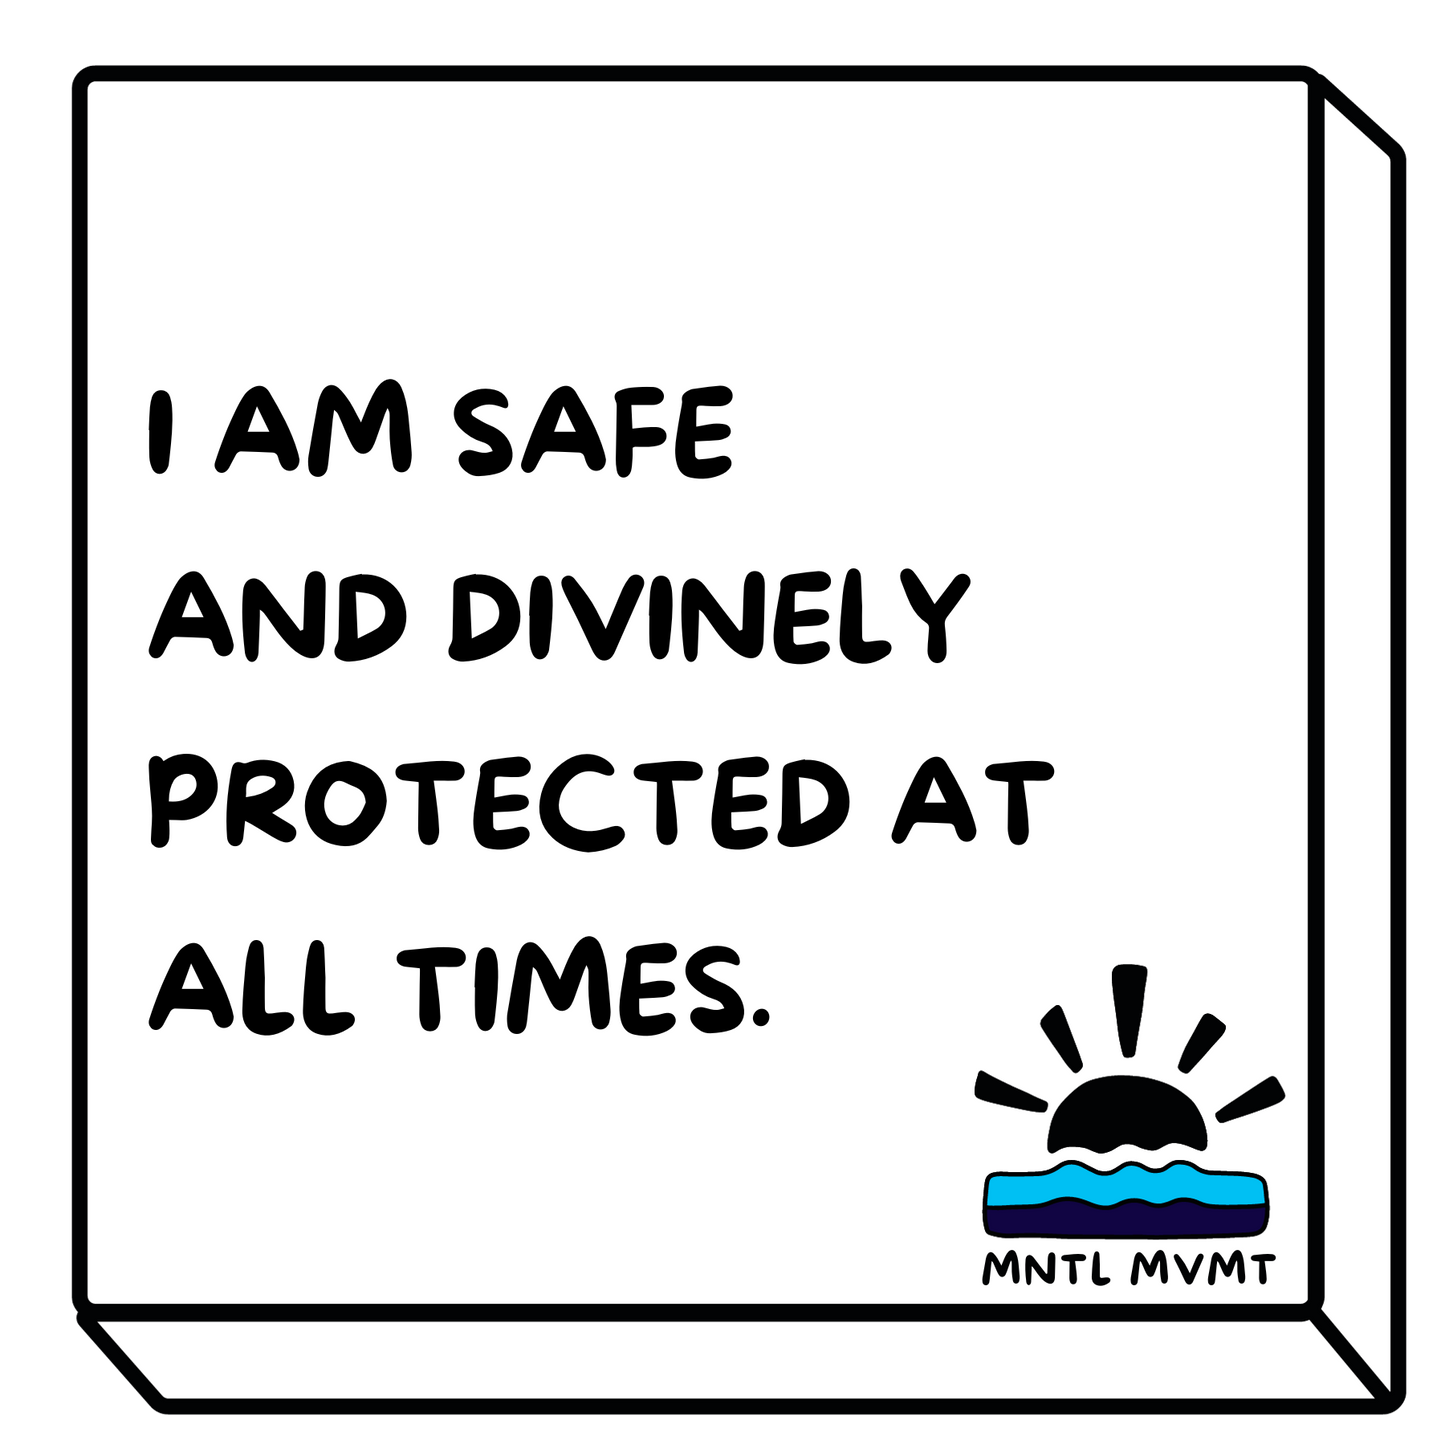 I AM SAFE AND DIVINELY PROTECTED AT ALL TIMES.